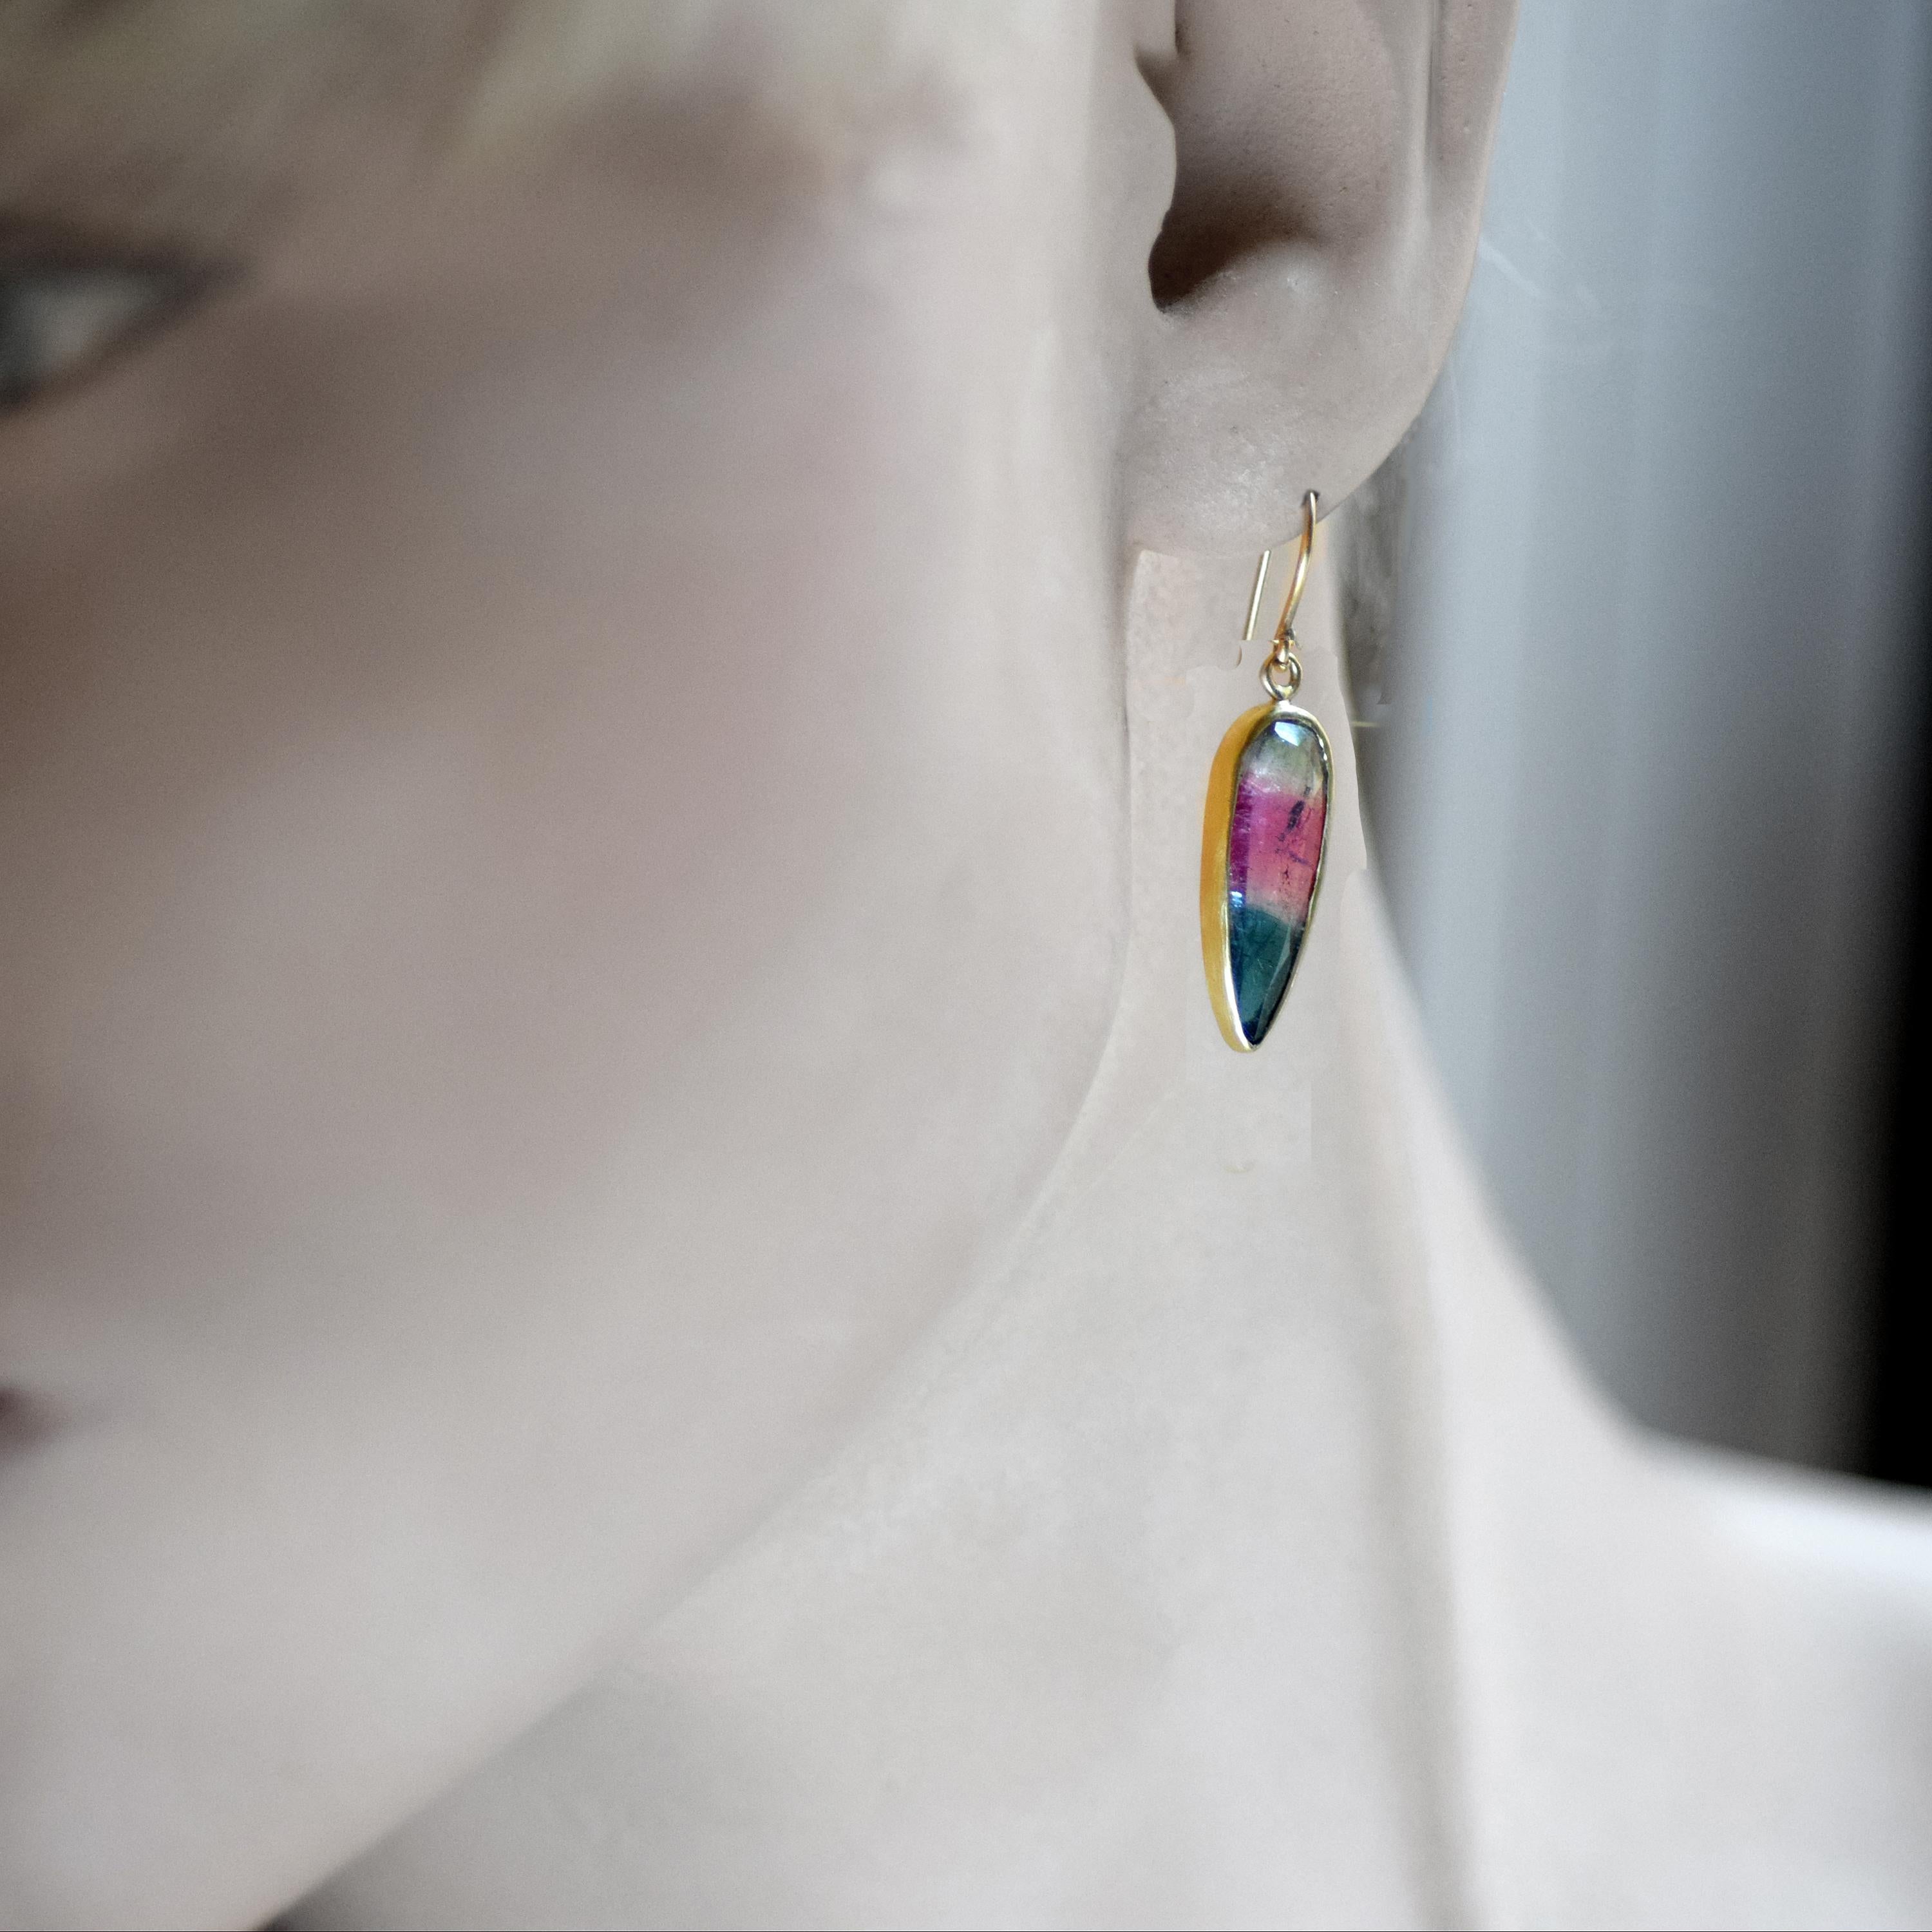 One-of-a-kind 18K gold earrings feature 2 pear shaped faceted watermelon Tourmalines, using my cross bar component.  Hand fabricated using recycled gold.

Measures: 1-3/4